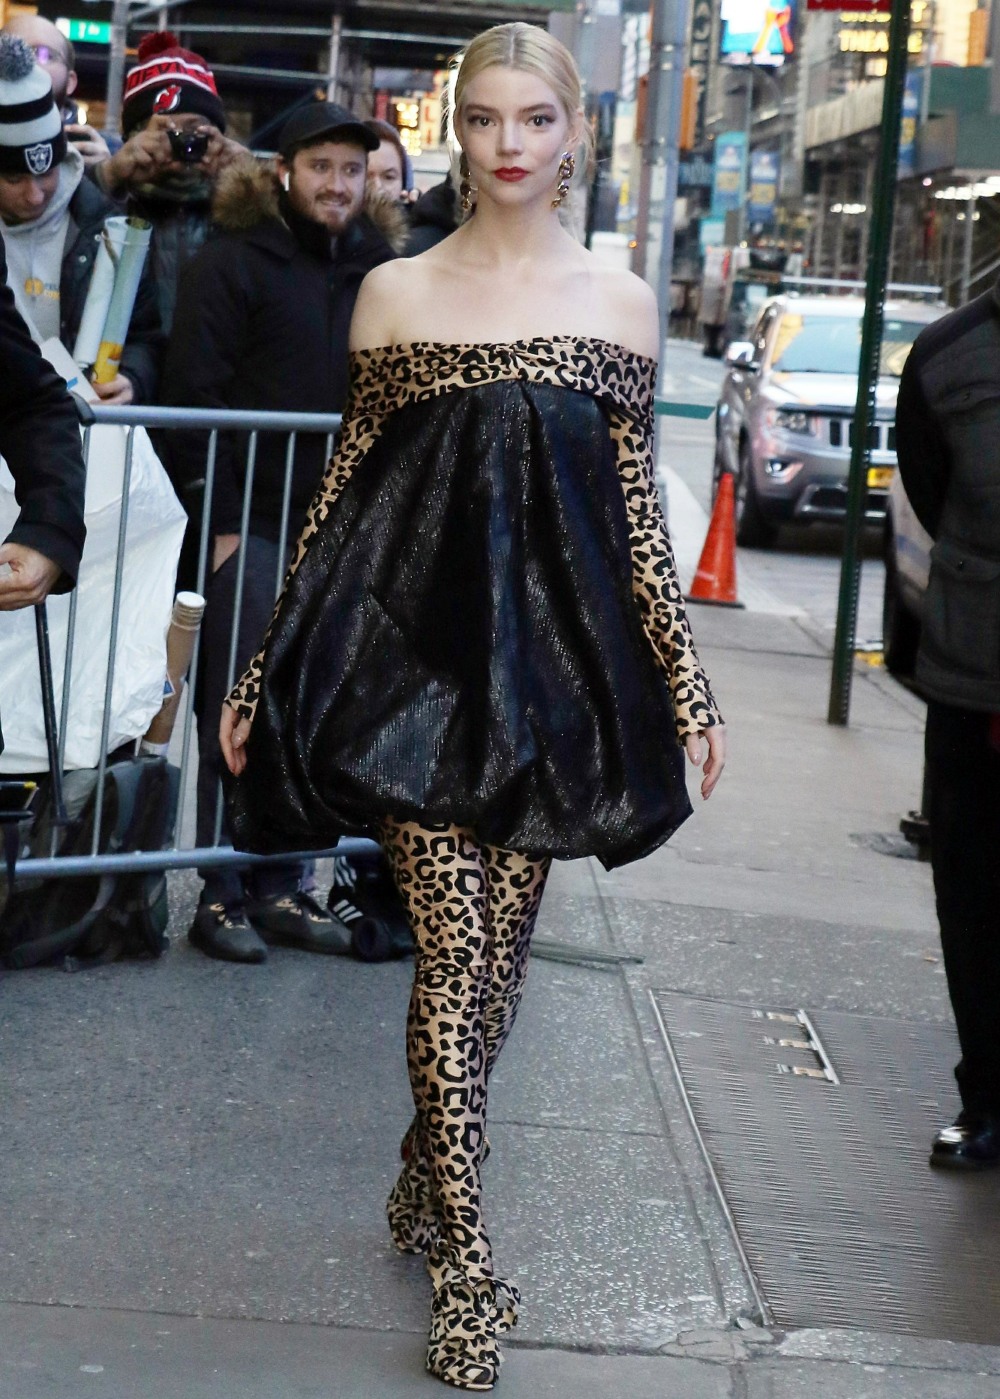 Anya Taylor-Joy takes a step on the wild side at Good Morning America in NYC!